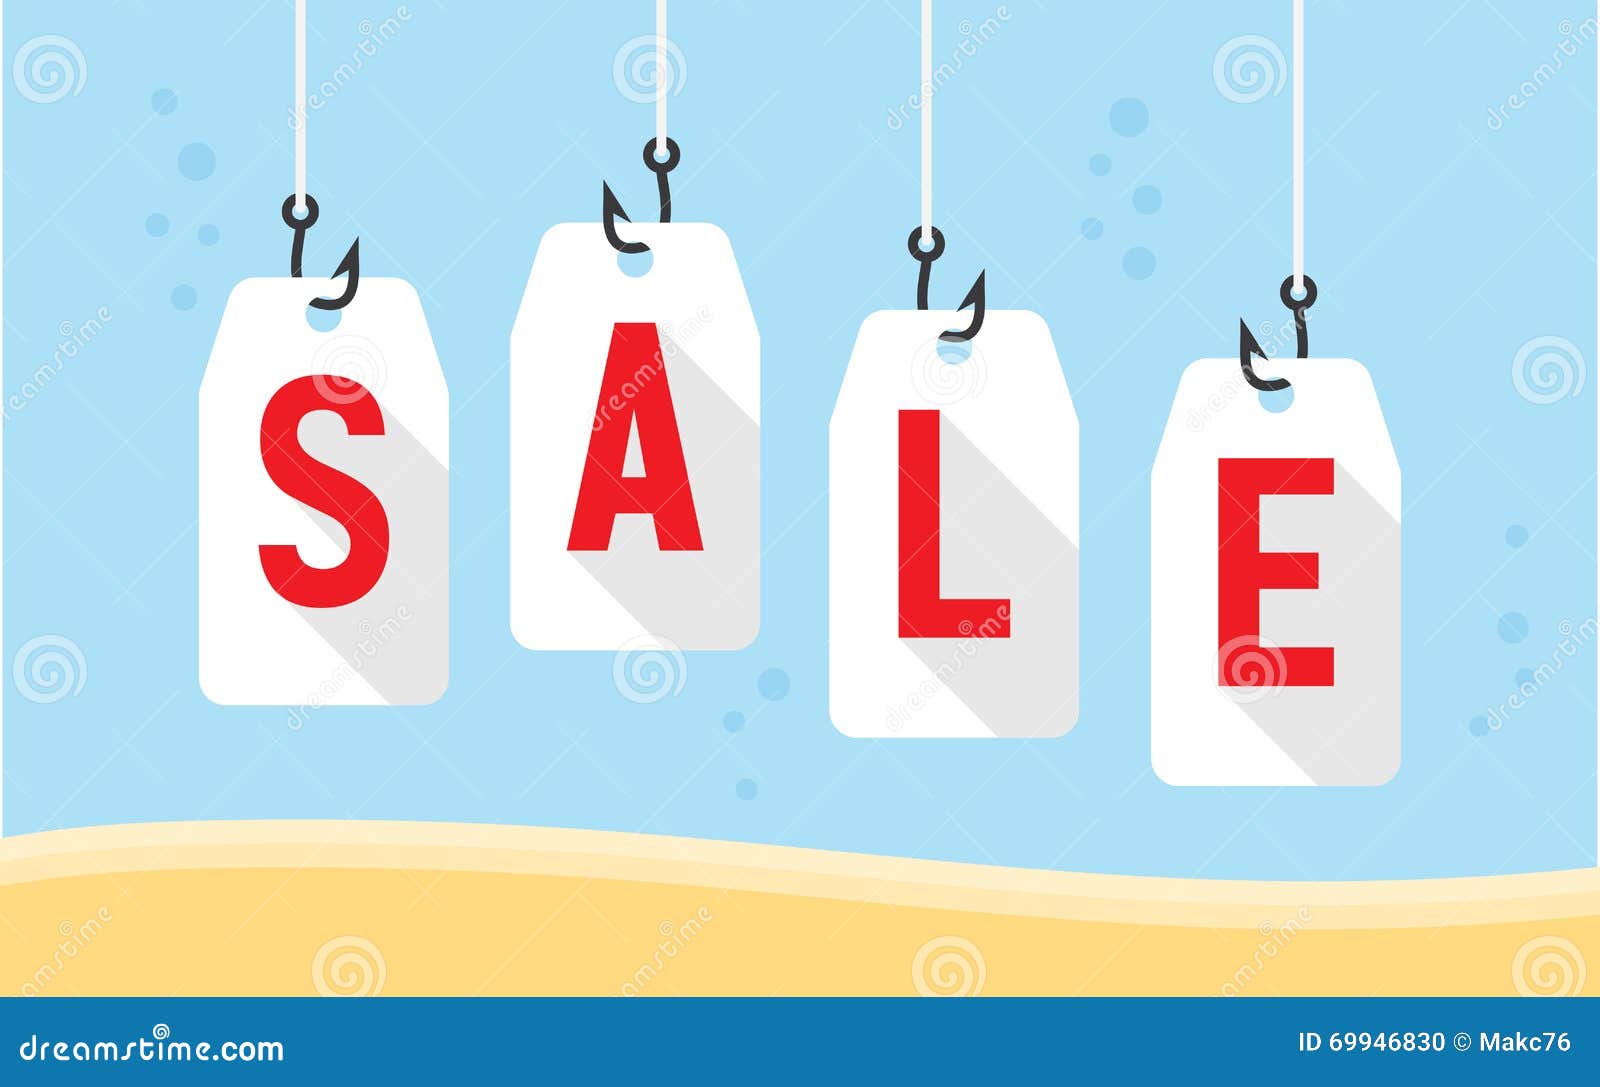 Sale prices bait stock vector. Illustration of offer - 69946830